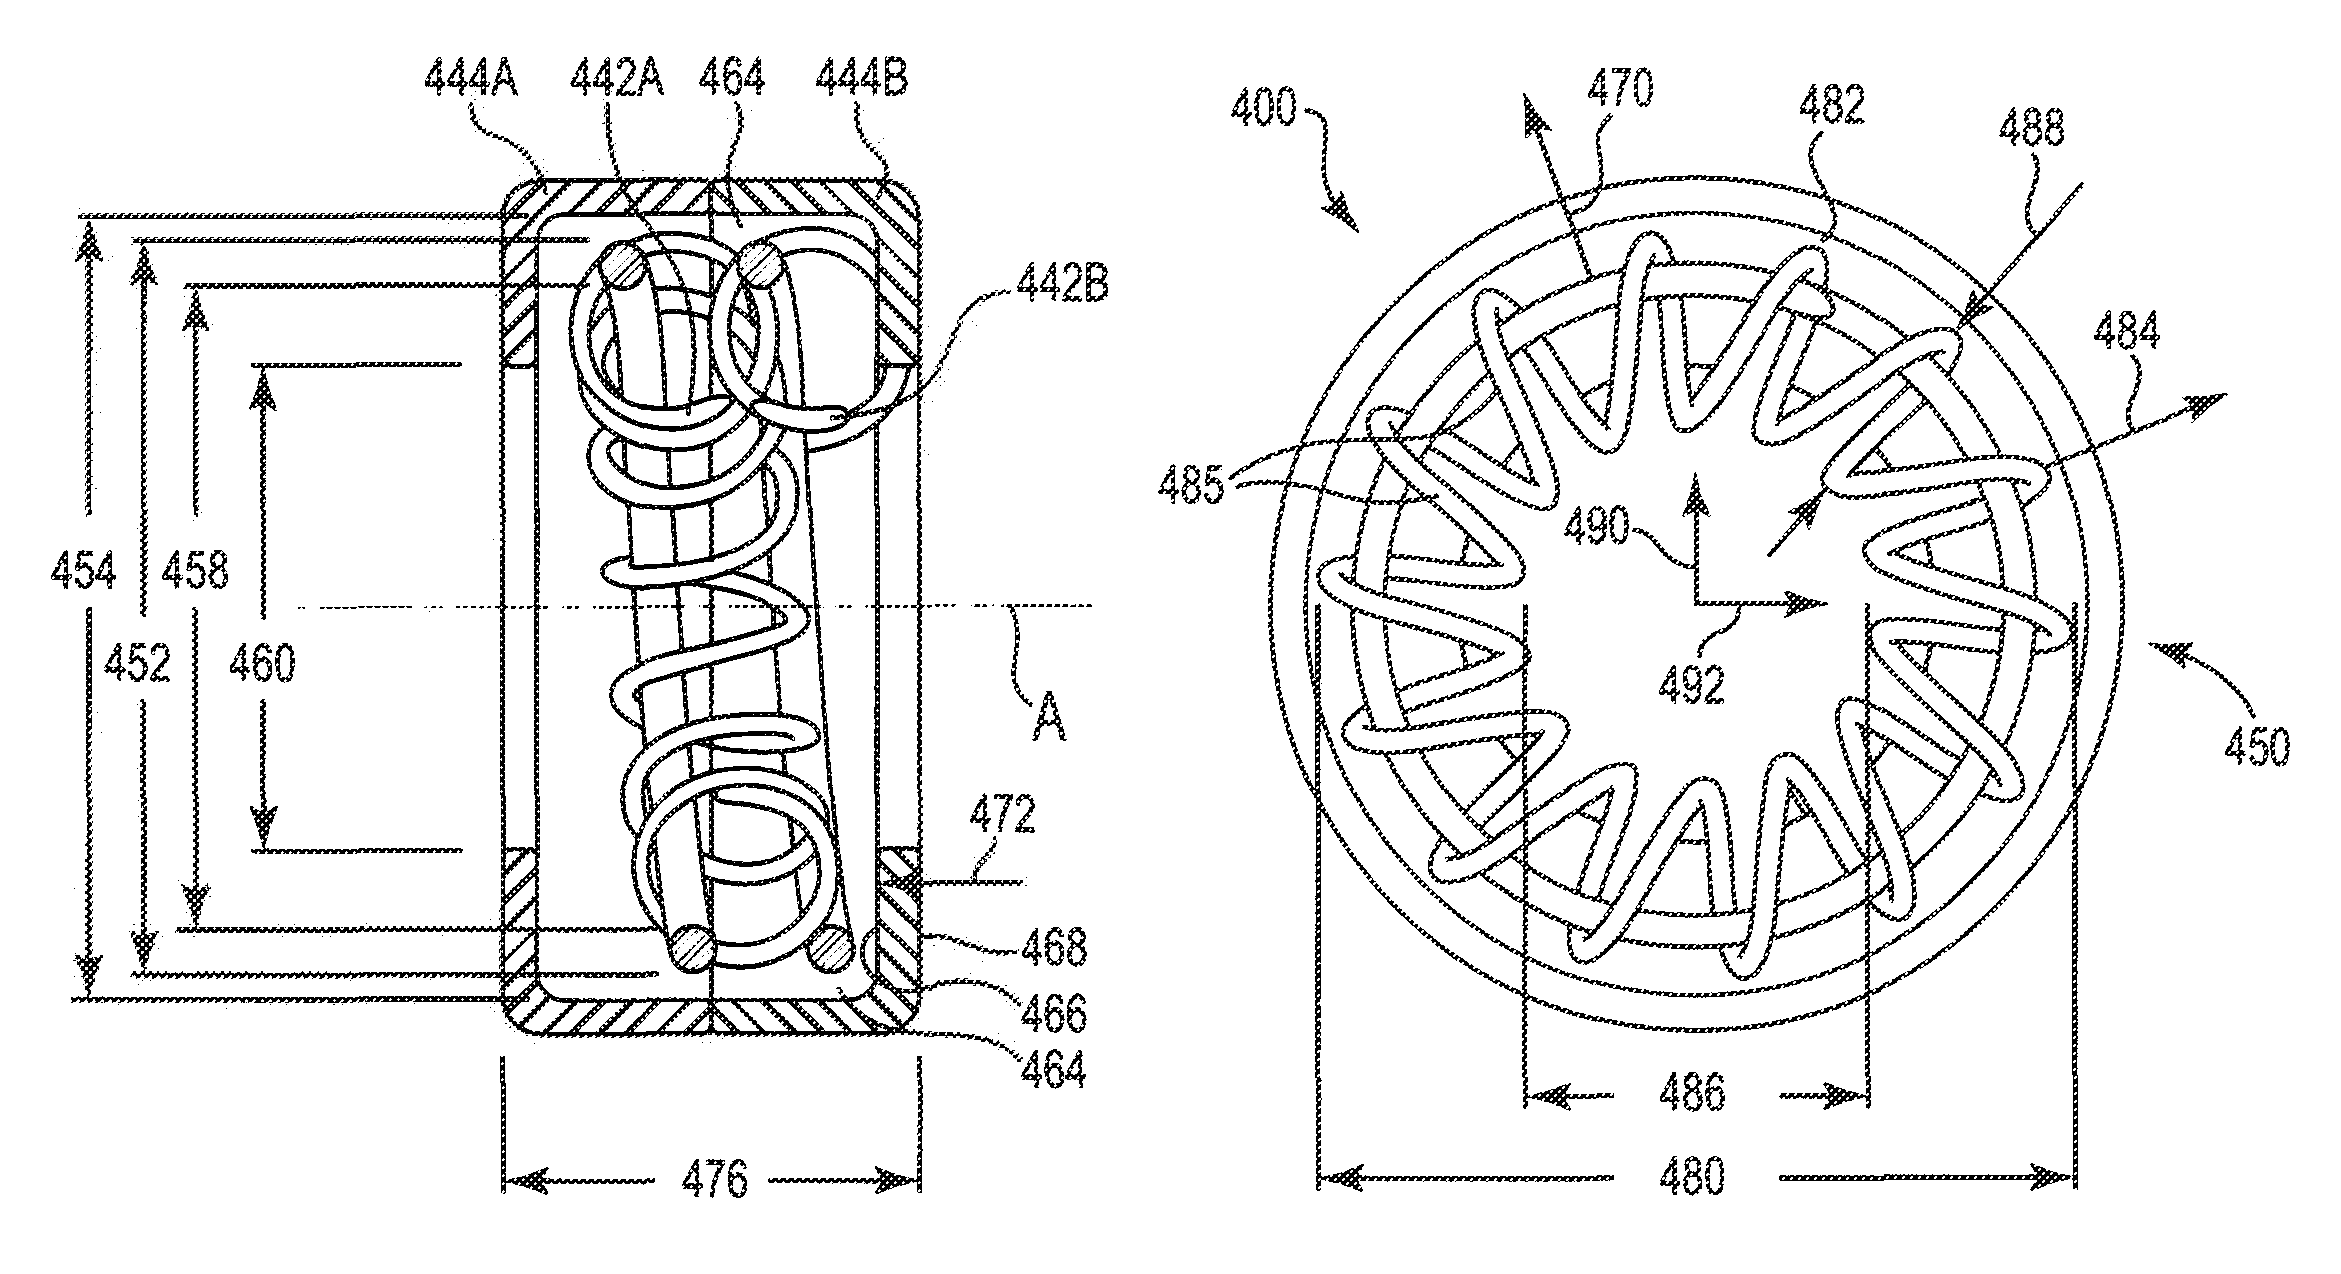 Low insertion force electrical connector for implantable medical devices